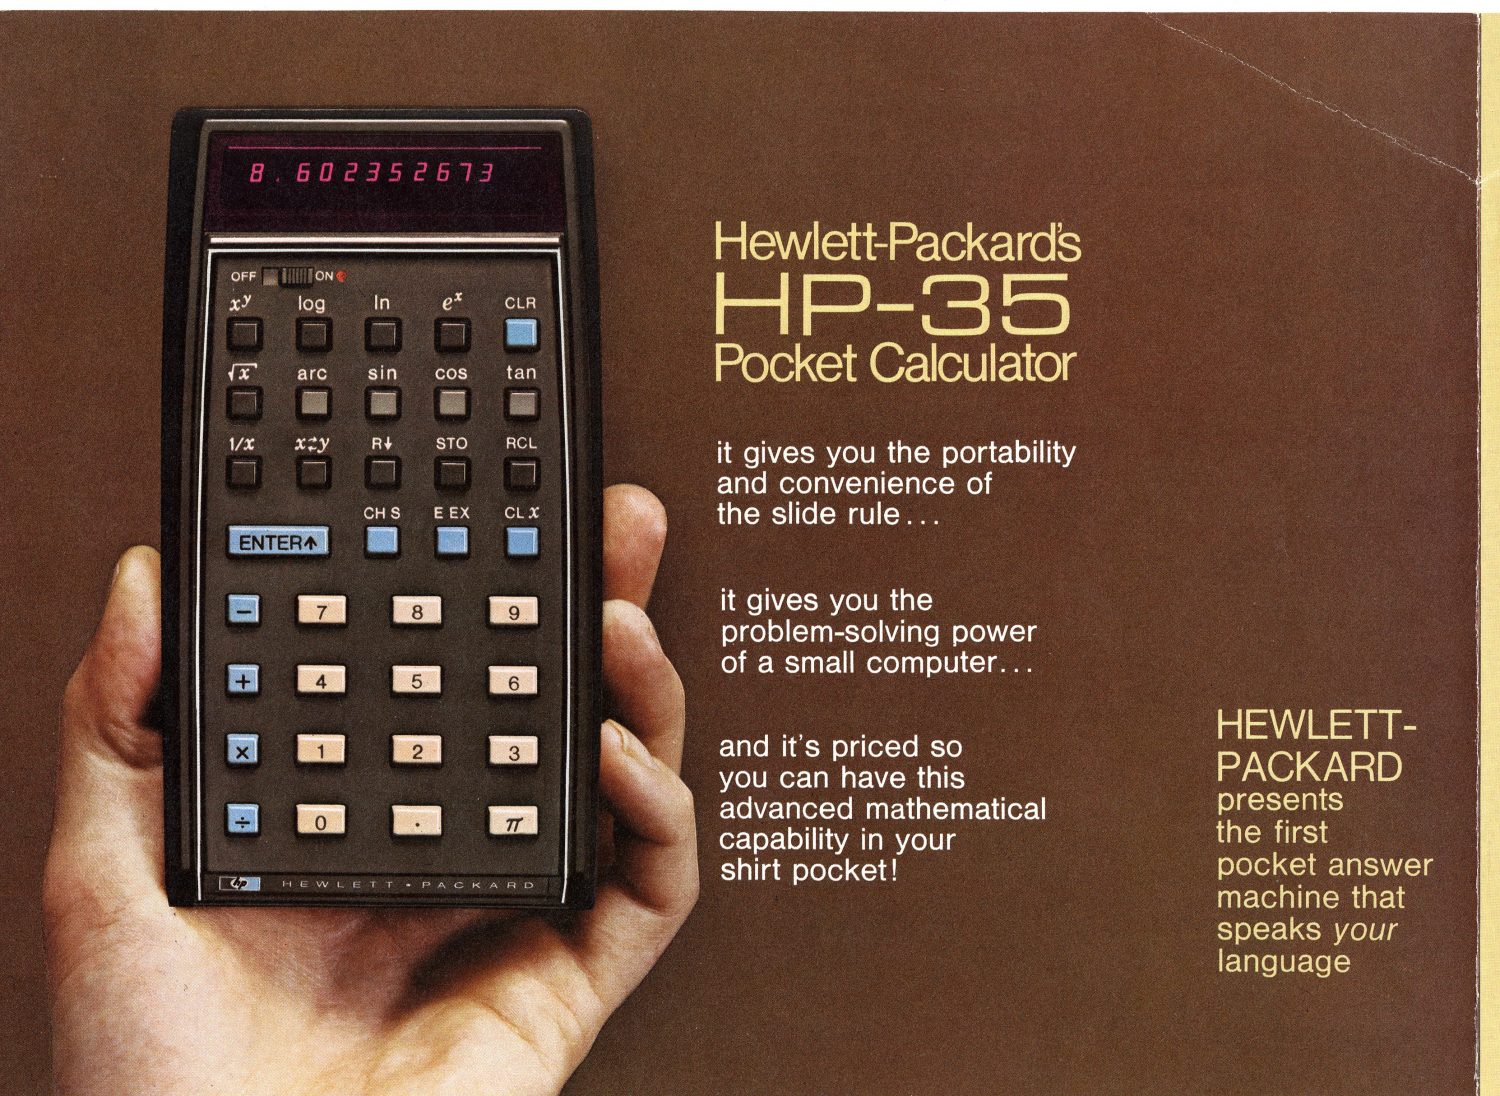 An ad for the HP 35 featuring the device held in one hand with text emphasizing its portability, power and reasonable price.